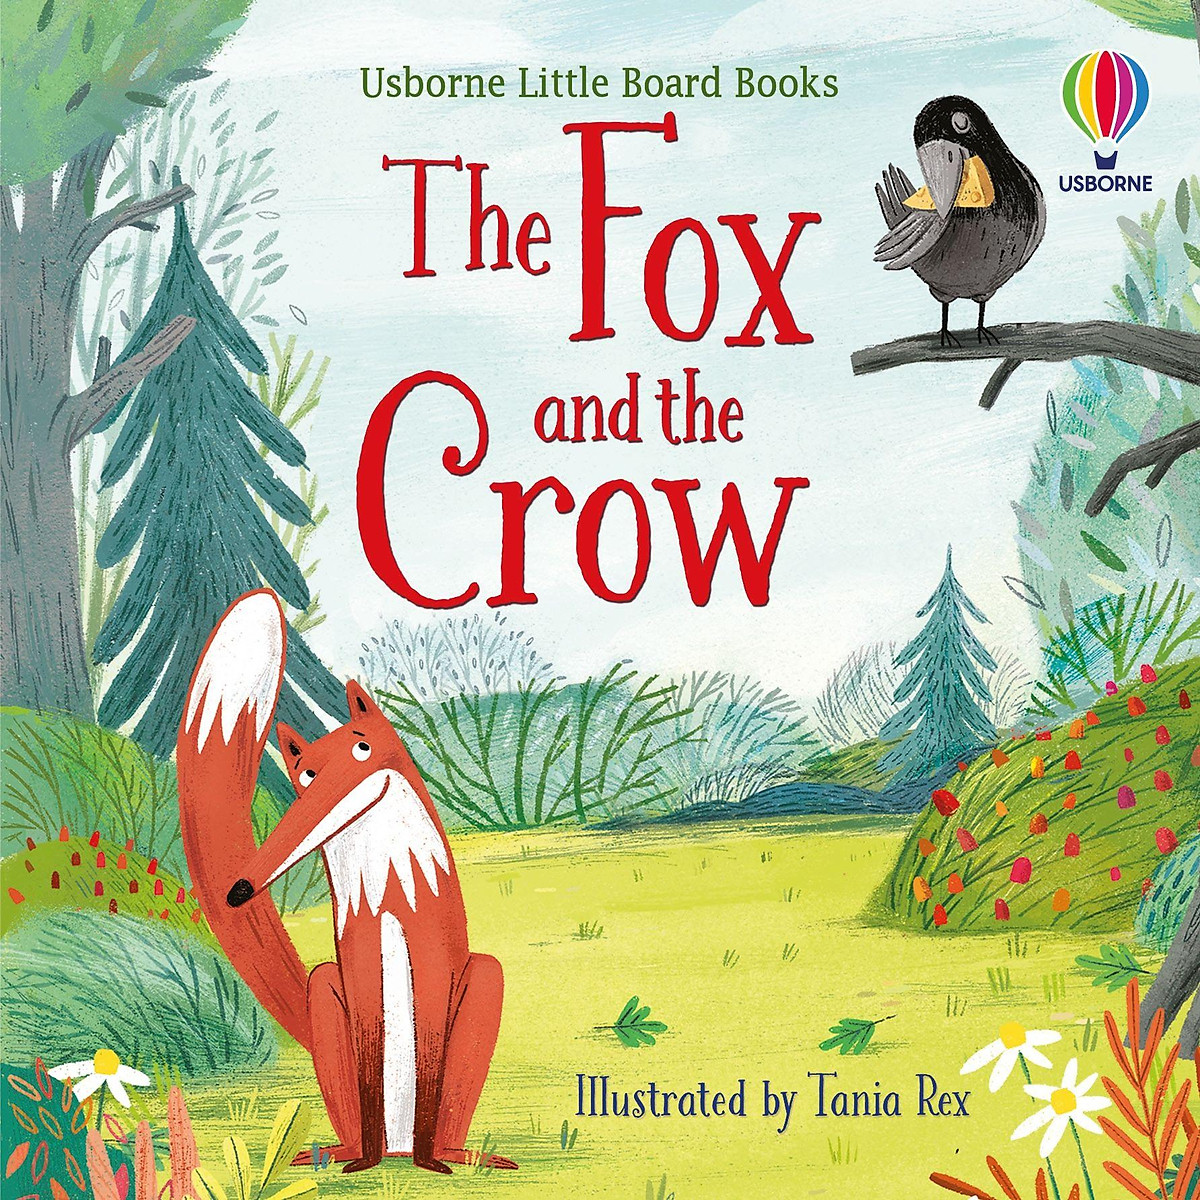 Little Board Books: The Fox and the Crow - TRUYỆN TRANH TIẾNG ANH CHO BÉ